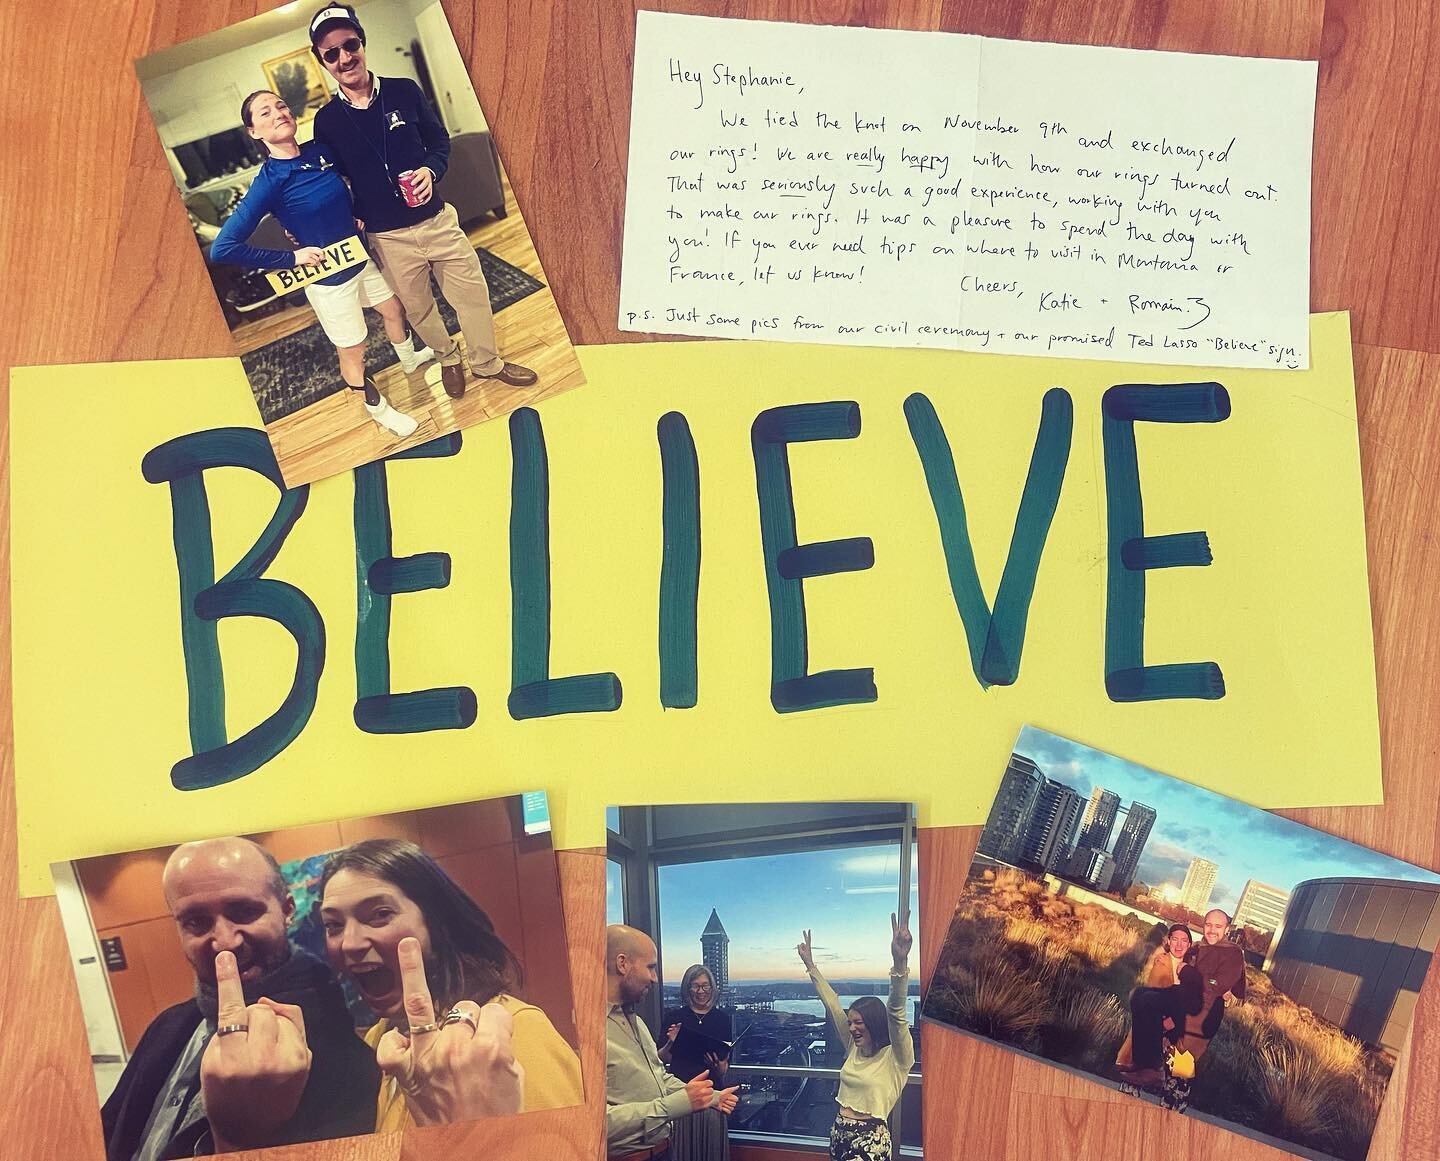 Sometimes I get a card or photos in the mail from past couples and it always makes my day! Several months ago I received such a fun package from Katie and Romain after they tied the knot! We totally connected talking about Ted Lasso and Bren&eacute; 